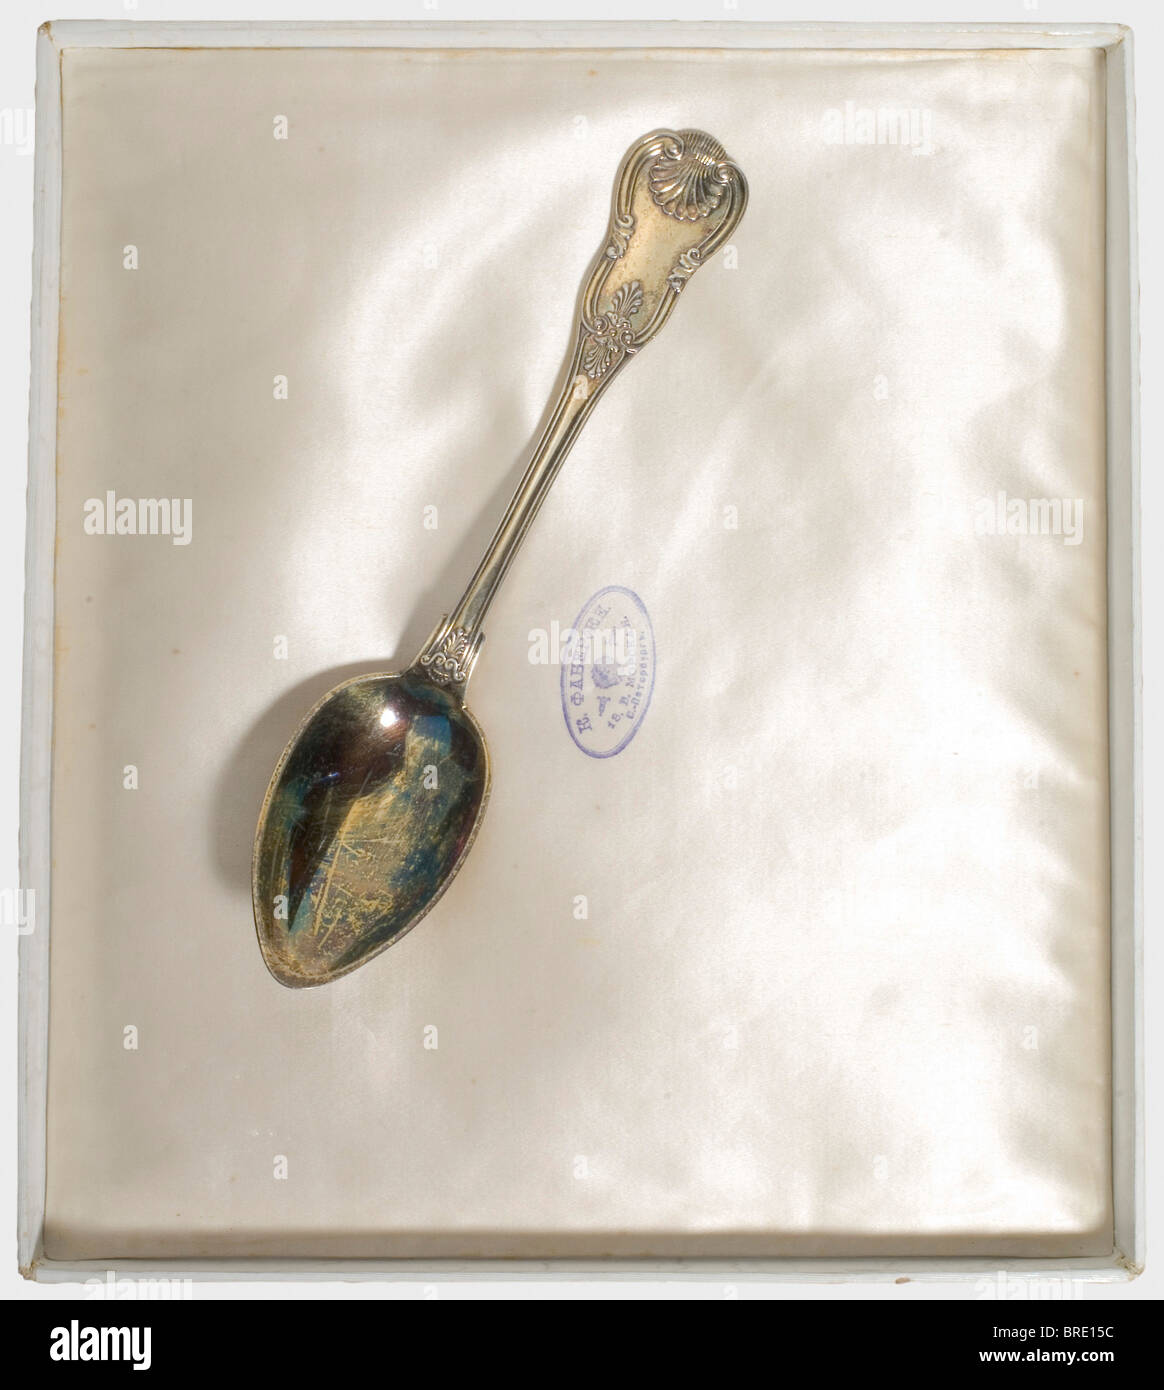 Grand Duchess Maria Nikolaevna Romanova (1819 - 1876), a vermeil spoon, France, circa 1840/50 Gilded silver, bearing a finely engraved monogram 'MN' beneath a grand ducal coronet. French export marks for the period 1840 - 1879. Length 21 cm. Weight 76 g. It comes with a cardboard Fabergé jewellry(?) box, stamped 'K. Faberge' in the silk of the lid, and with the St. Petersburg address. Dimensions 28 x 24 x 4.6 cm. Maria Nikolaevna, daughter of Tsar Nicholas I, first married Maxmilian de Beauharnais, Duke of Leuchtenberg, and then in 1856 she married Count Gregor, Stock Photo